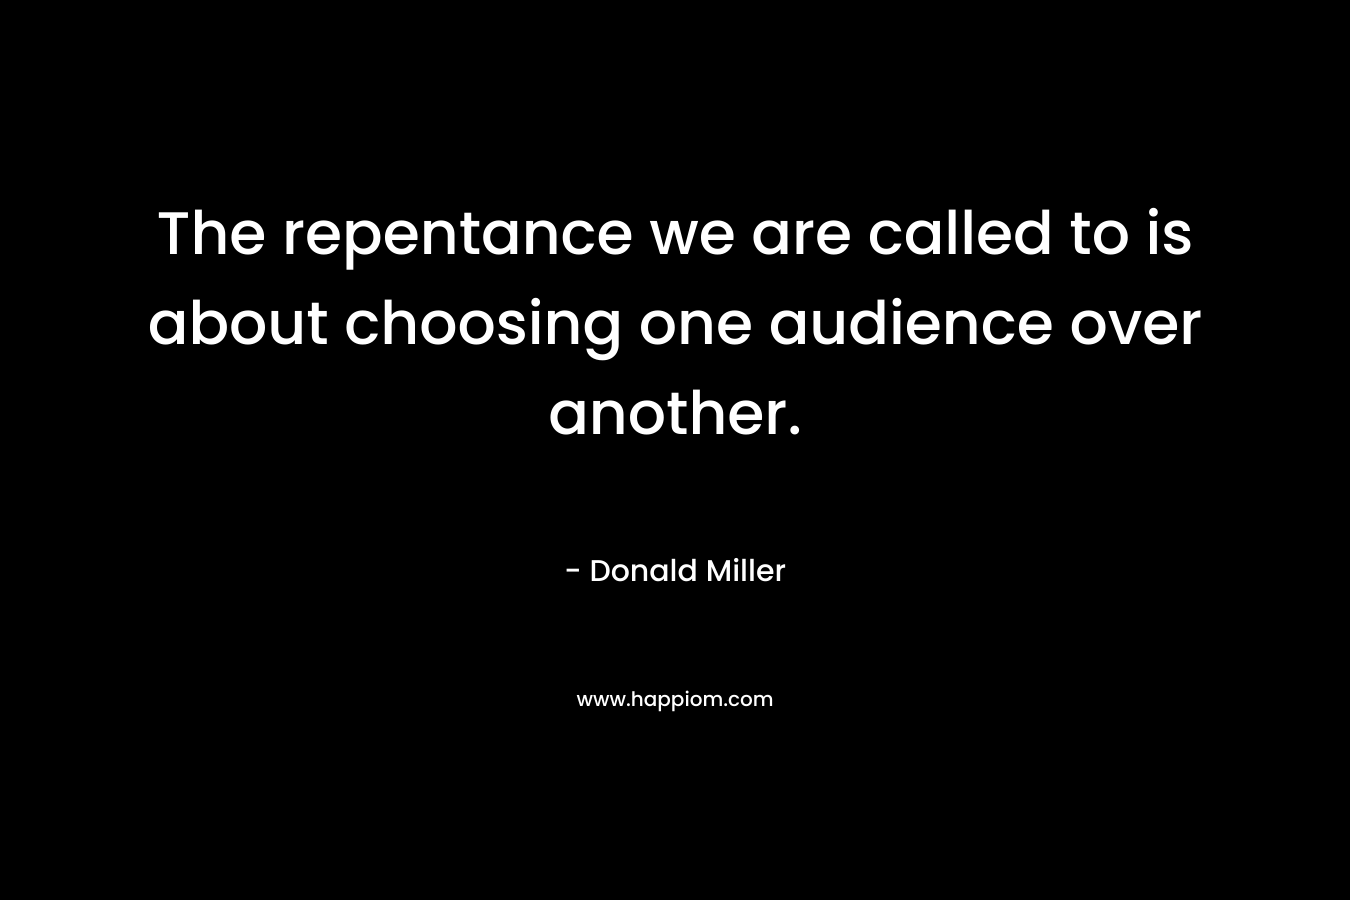 The repentance we are called to is about choosing one audience over another.